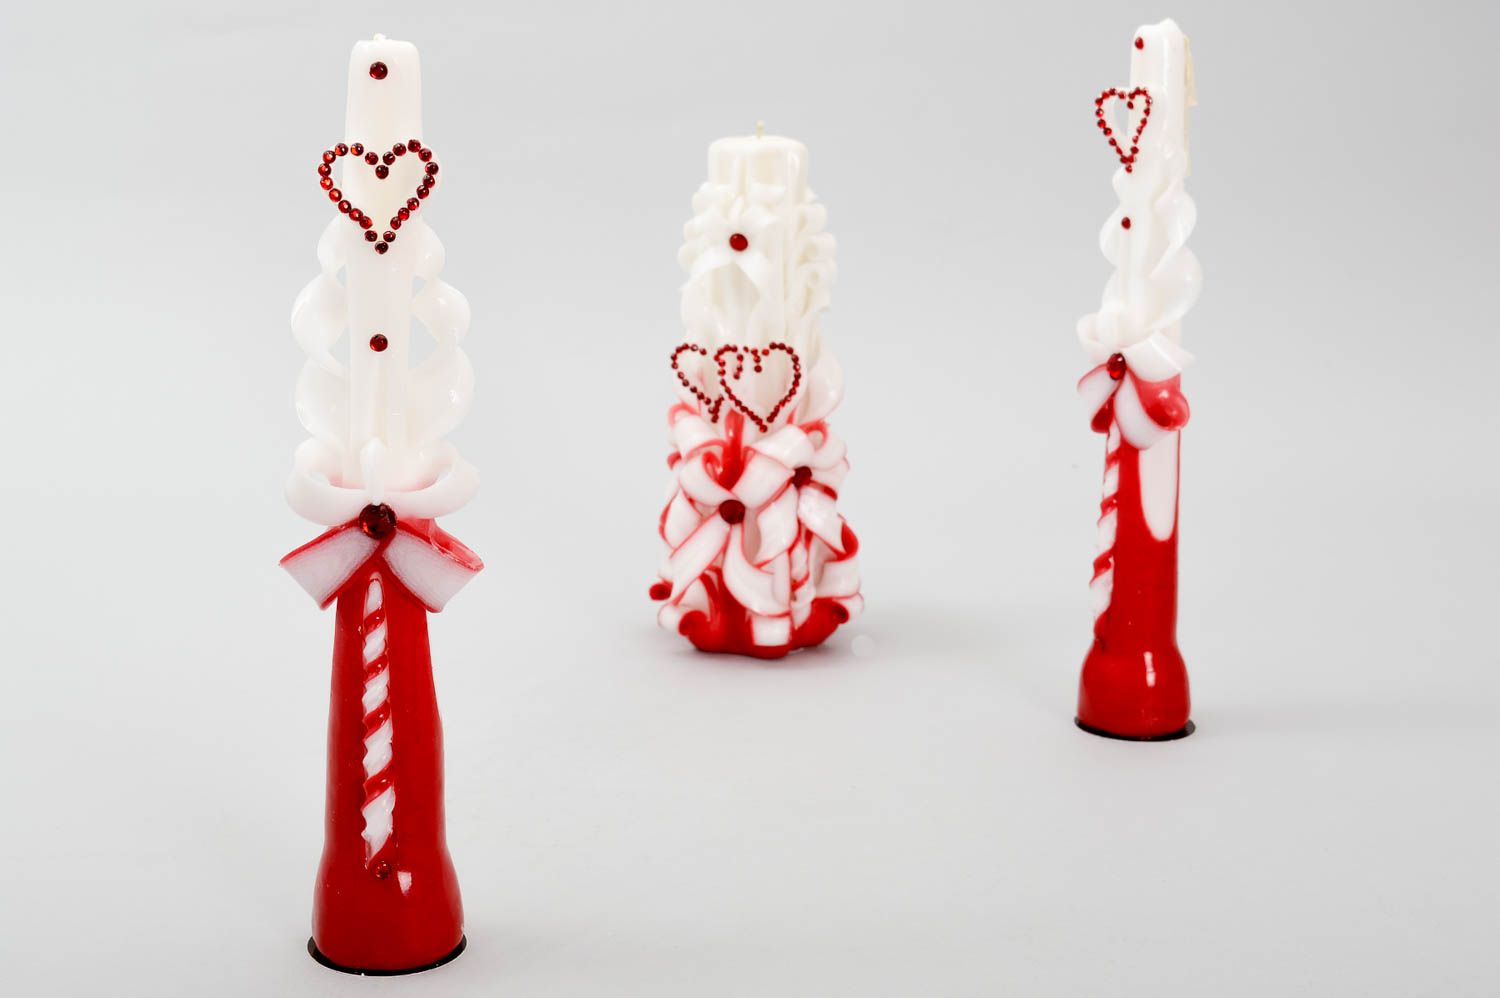 Carved handmade candles wedding candles handmade gifts home decor ideas photo 5